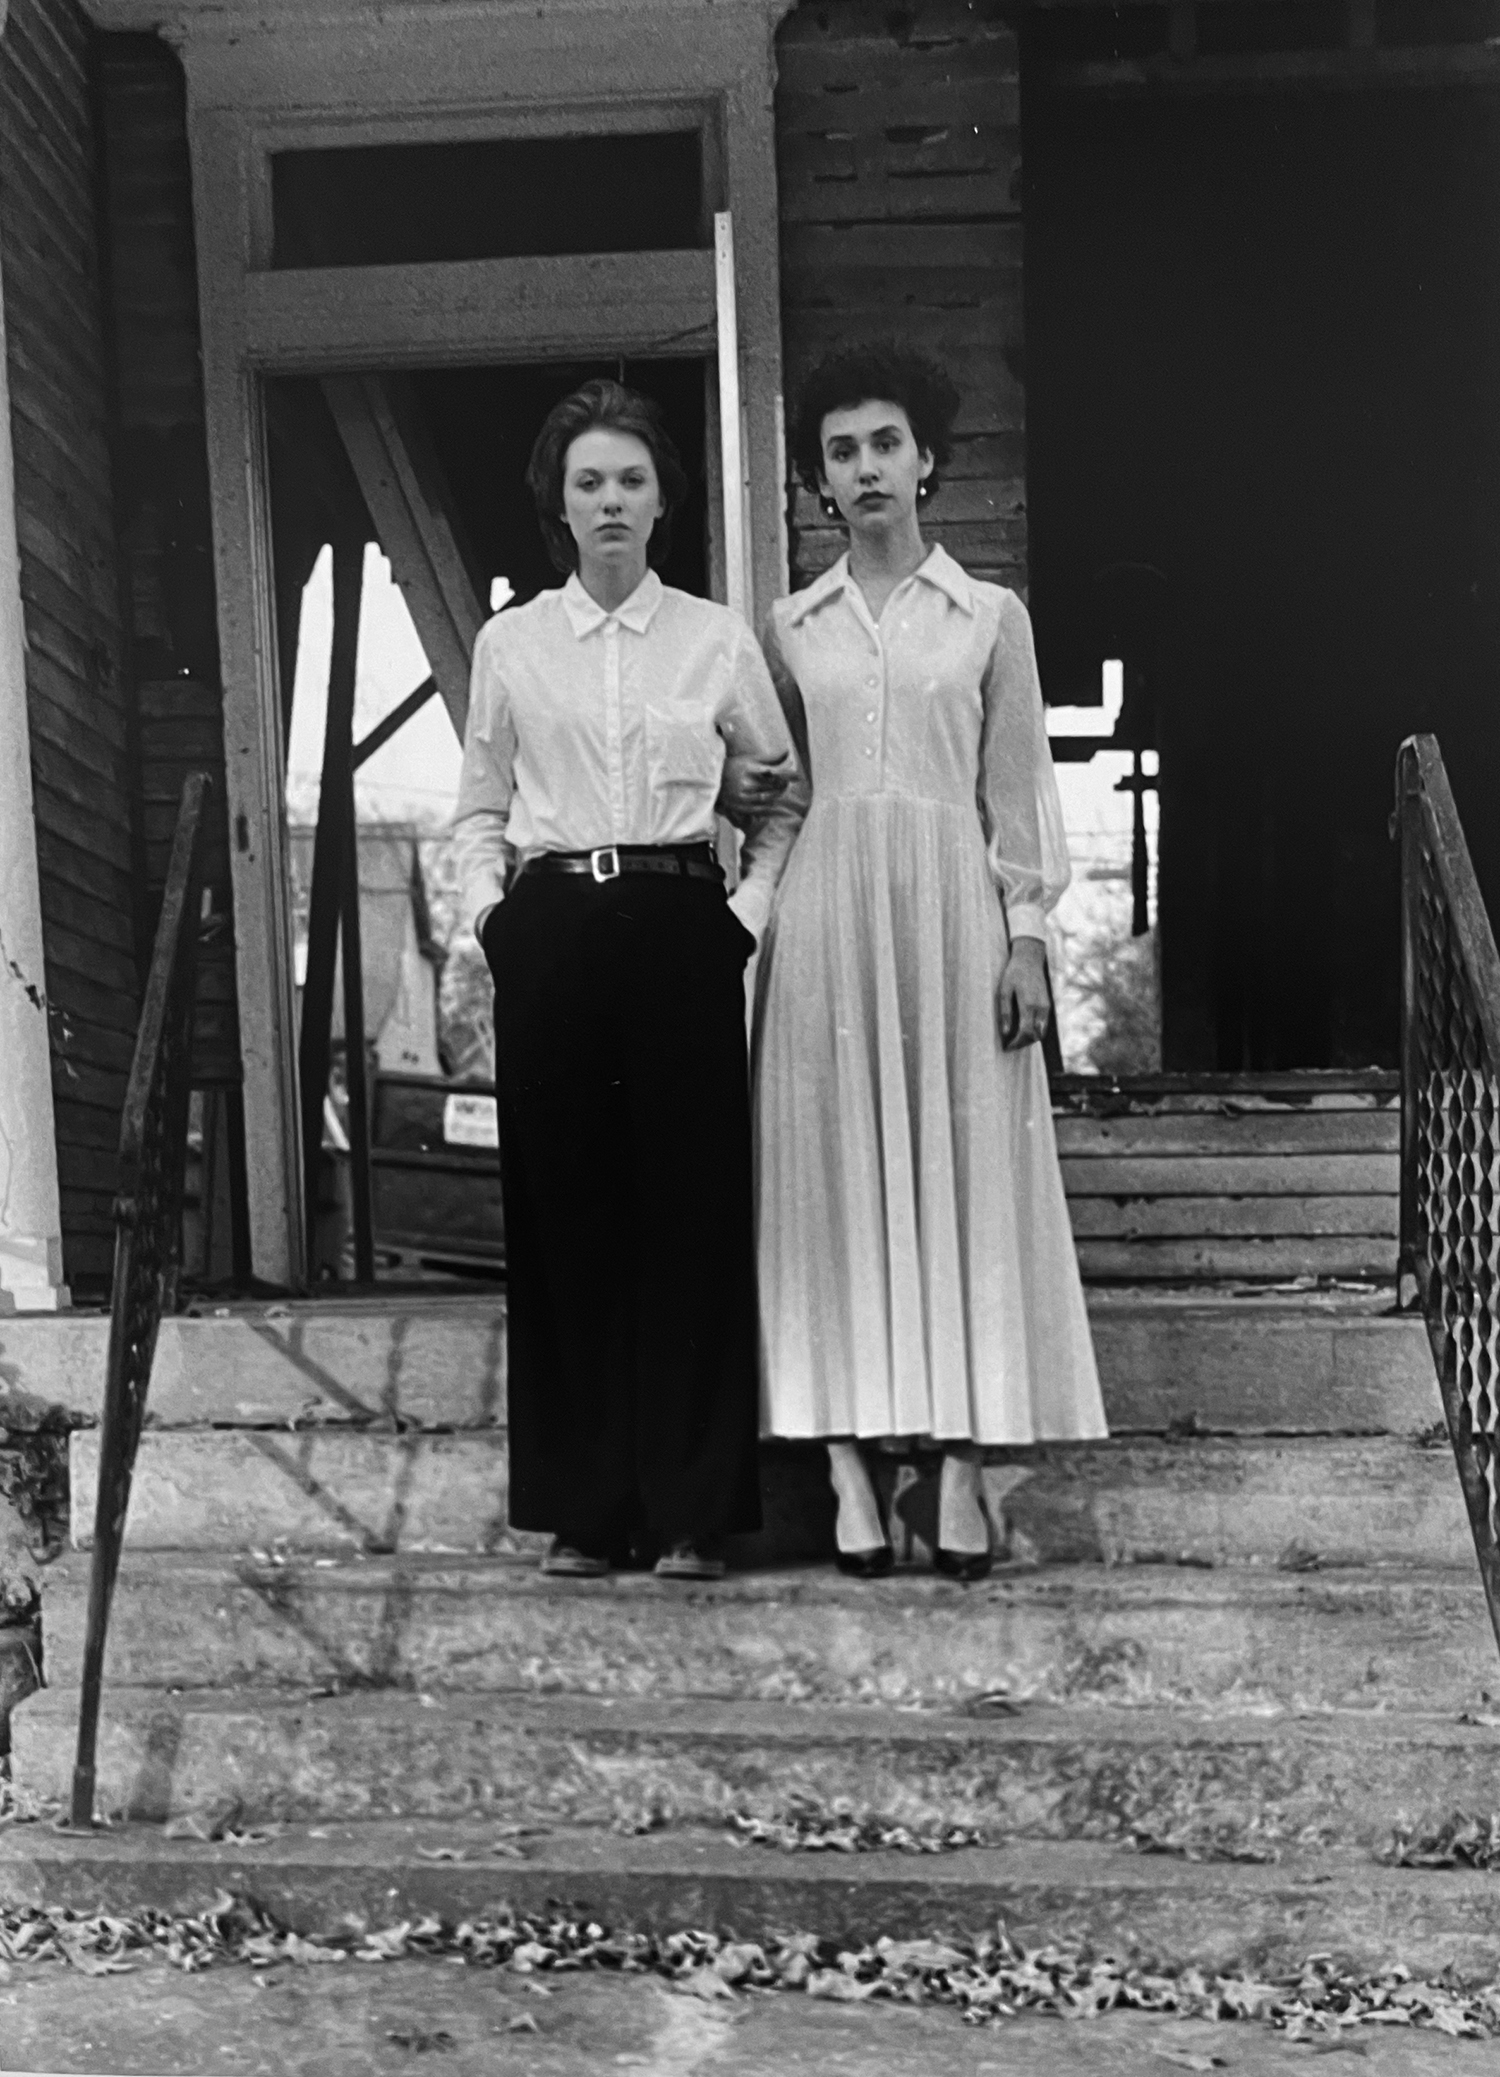 2 women wearing long skirts on the porch of an old house in black and white